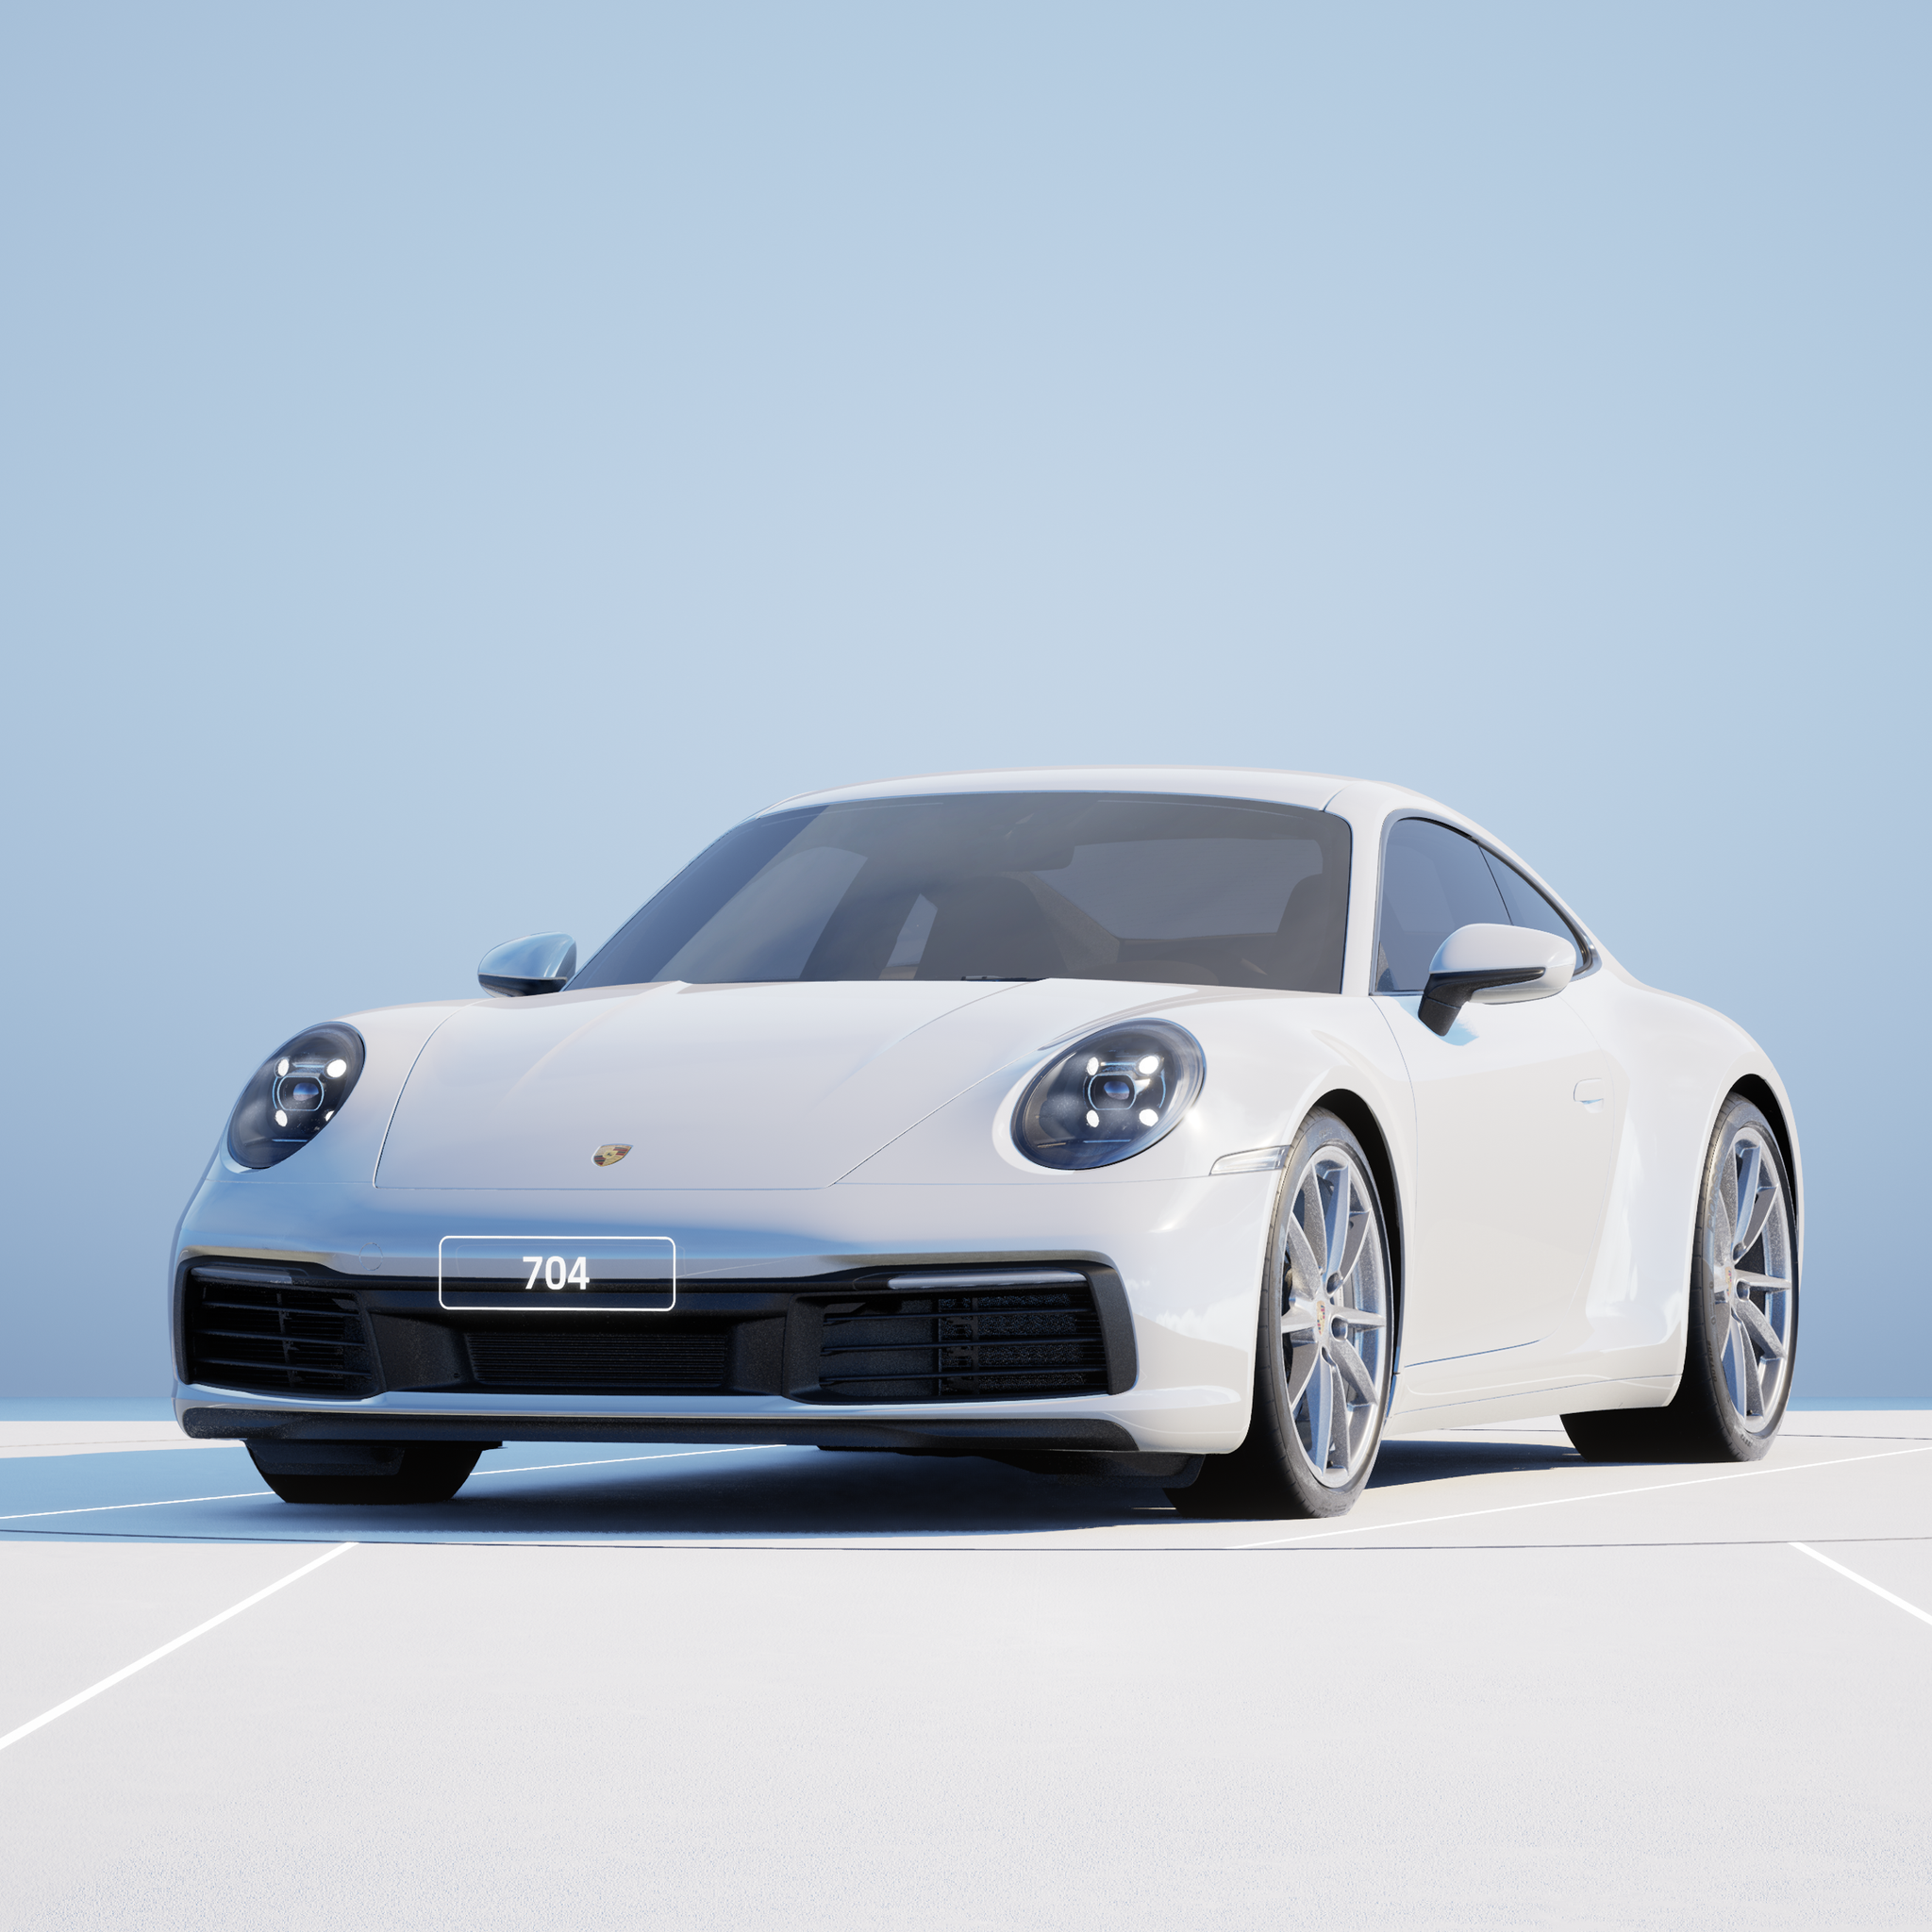 The PORSCHΞ 911 704 image in phase